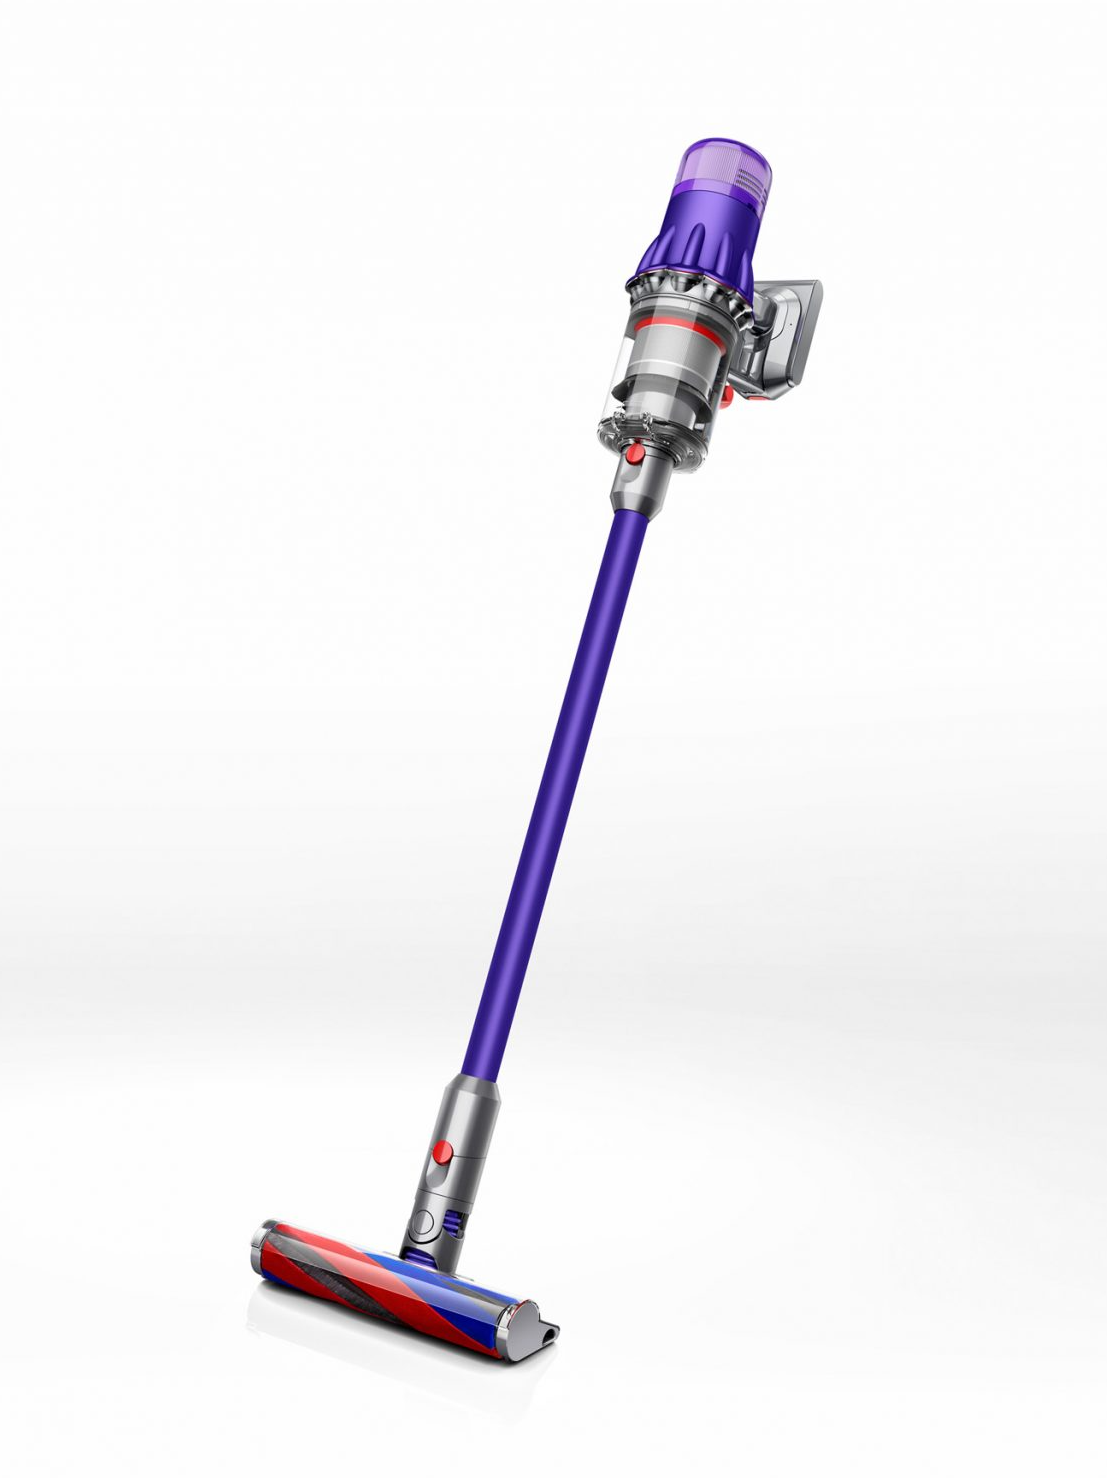 Dyson launches a lighter vacuum for Asian homes, with the same motor